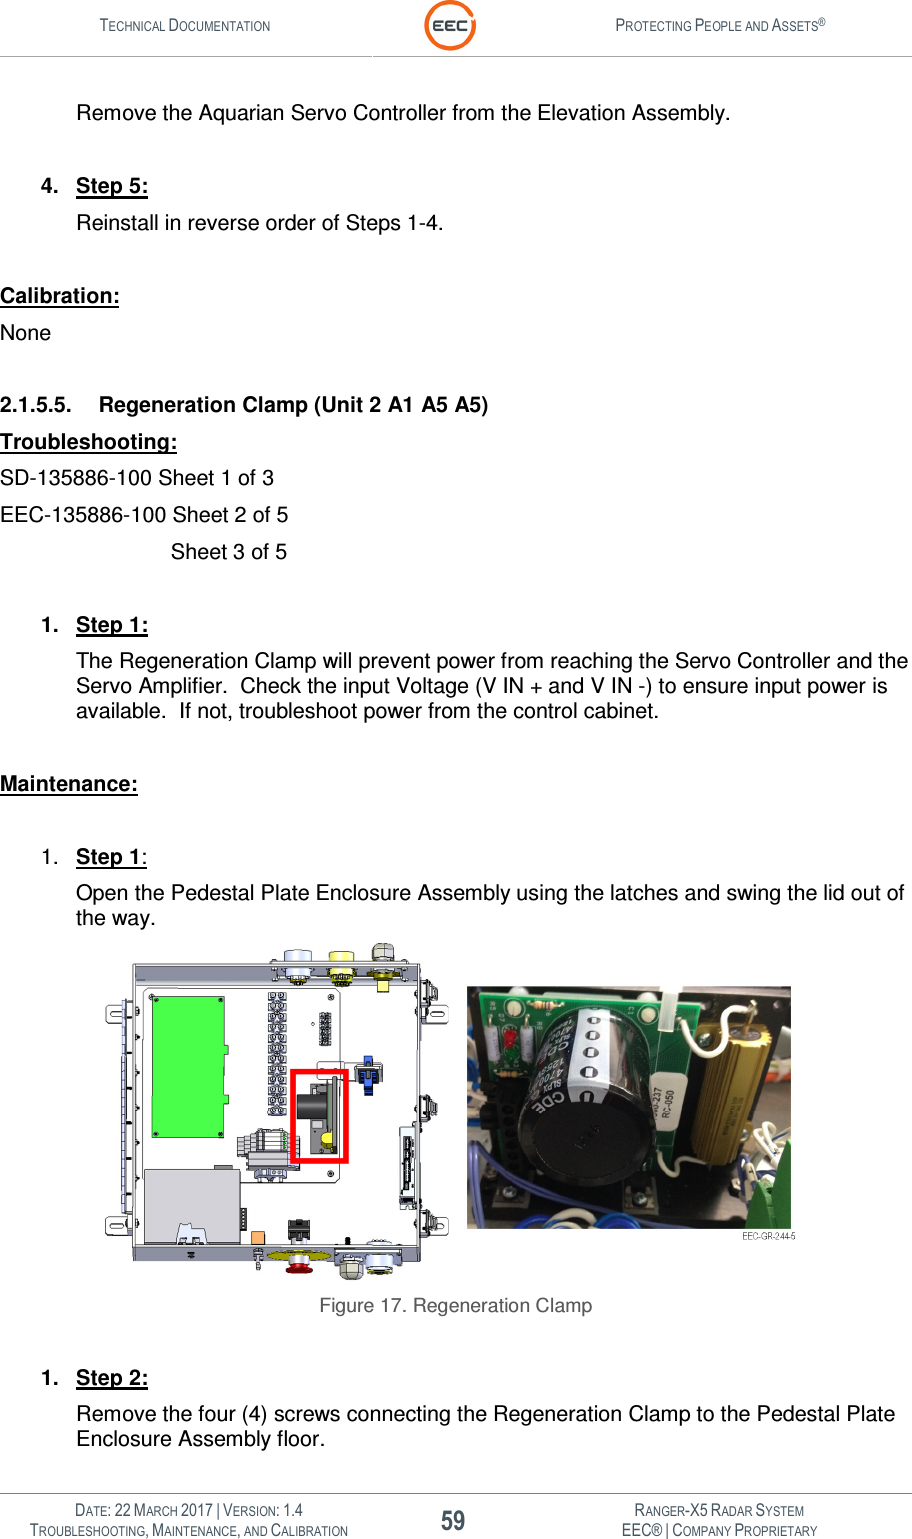 TECHNICAL DOCUMENTATION  PROTECTING PEOPLE AND ASSETS®   DATE: 22 MARCH 2017 | VERSION: 1.4 59 RANGER-X5 RADAR SYSTEM TROUBLESHOOTING, MAINTENANCE, AND CALIBRATION EEC® | COMPANY PROPRIETARY  Remove the Aquarian Servo Controller from the Elevation Assembly.  4.  Step 5: Reinstall in reverse order of Steps 1-4.  Calibration: None  2.1.5.5.  Regeneration Clamp (Unit 2 A1 A5 A5) Troubleshooting: SD-135886-100 Sheet 1 of 3 EEC-135886-100 Sheet 2 of 5          Sheet 3 of 5  1.  Step 1: The Regeneration Clamp will prevent power from reaching the Servo Controller and the Servo Amplifier.  Check the input Voltage (V IN + and V IN -) to ensure input power is available.  If not, troubleshoot power from the control cabinet.  Maintenance:  1.  Step 1: Open the Pedestal Plate Enclosure Assembly using the latches and swing the lid out of the way.   Figure 17. Regeneration Clamp  1.  Step 2: Remove the four (4) screws connecting the Regeneration Clamp to the Pedestal Plate Enclosure Assembly floor. 